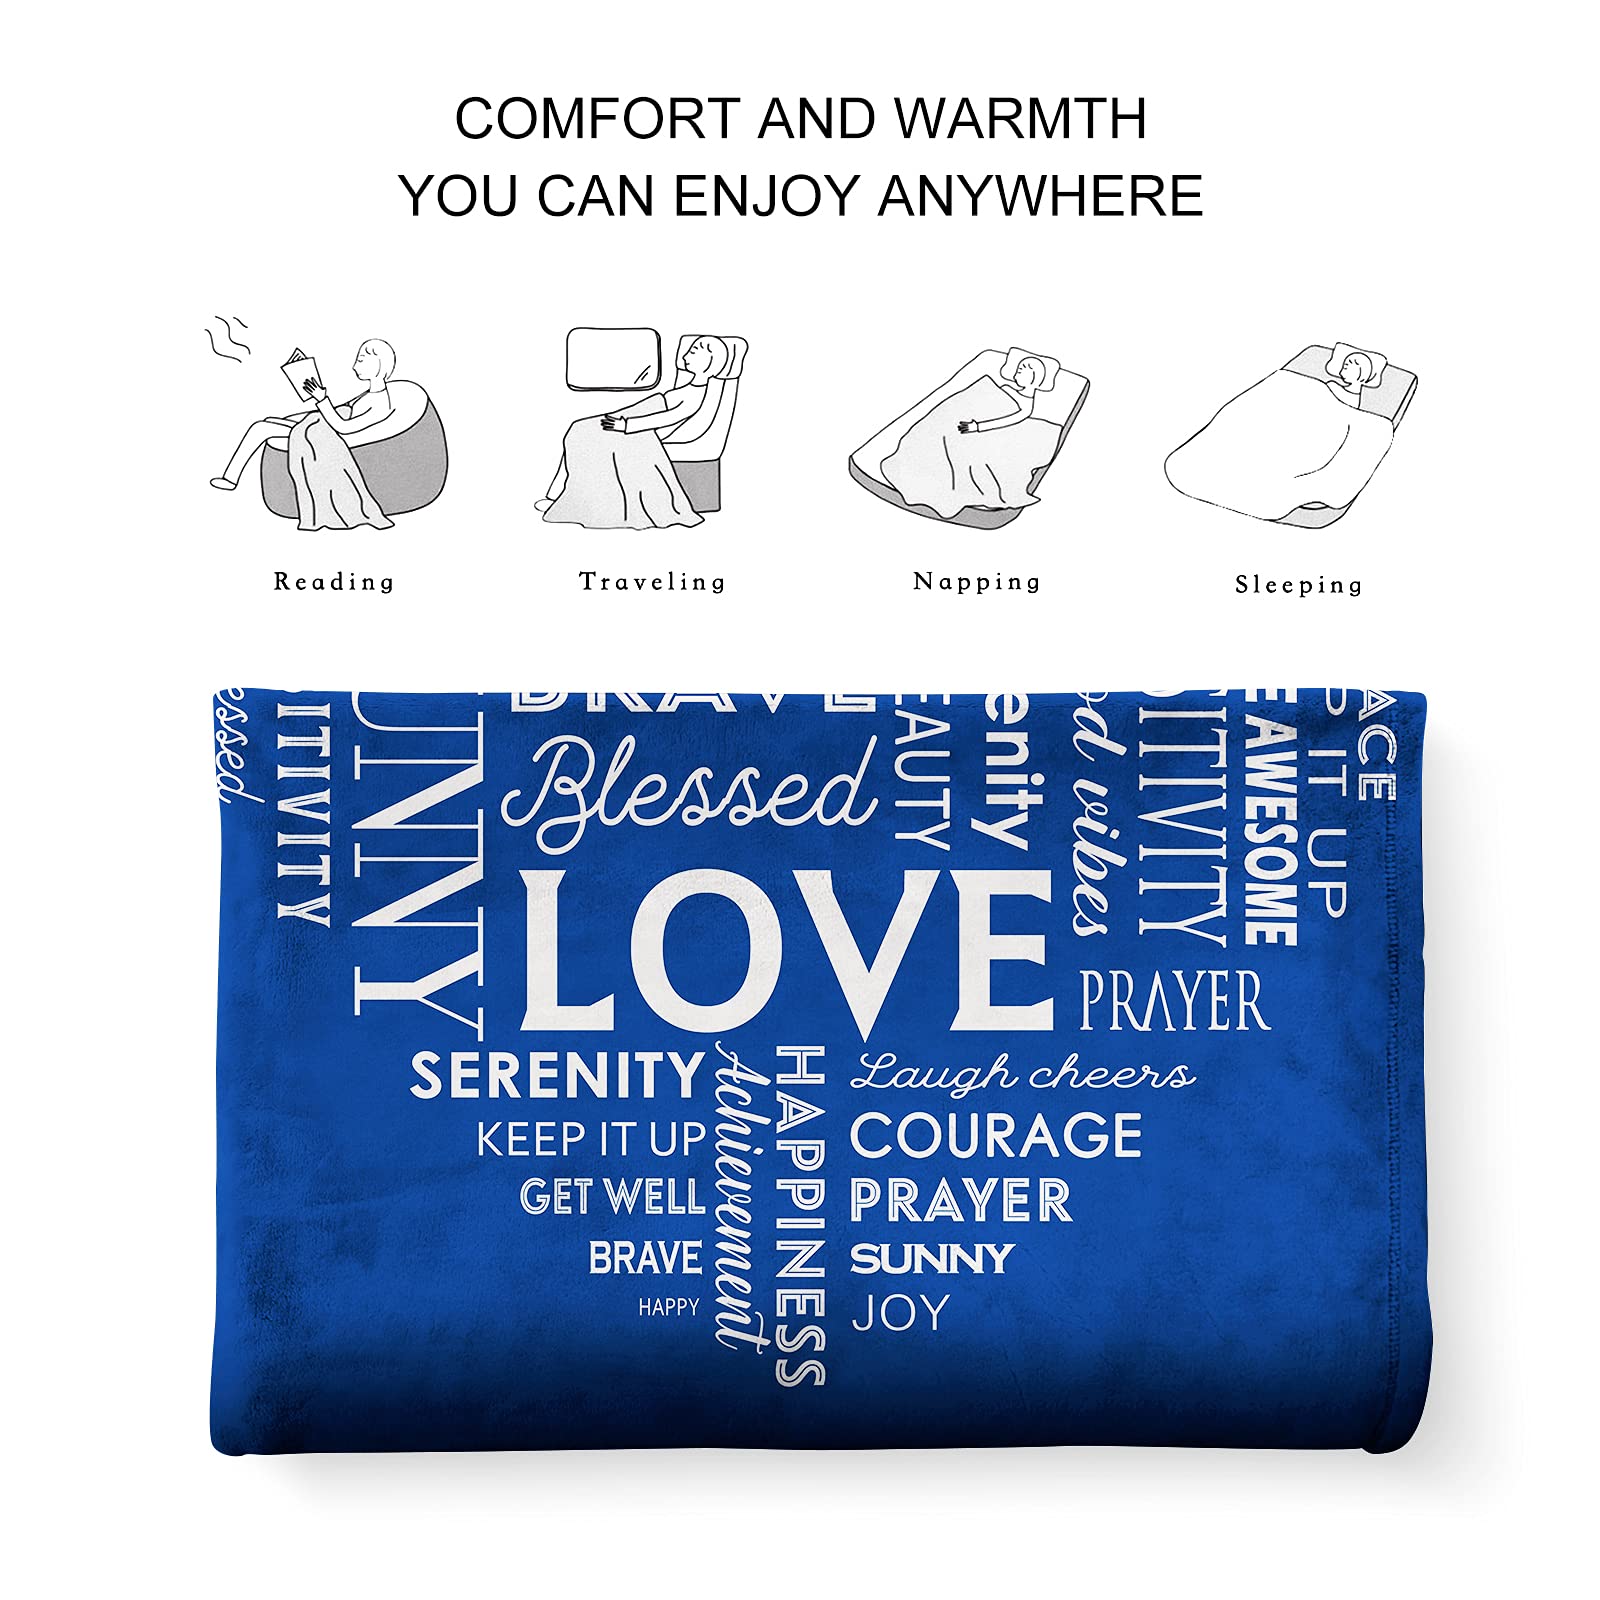 Get Well Soon Gifts for Women Blanket Gifts for Cancer Patients Women  50X60 Hugs Blanket Healing Blanket Gifts for Women Inspirational Blanket